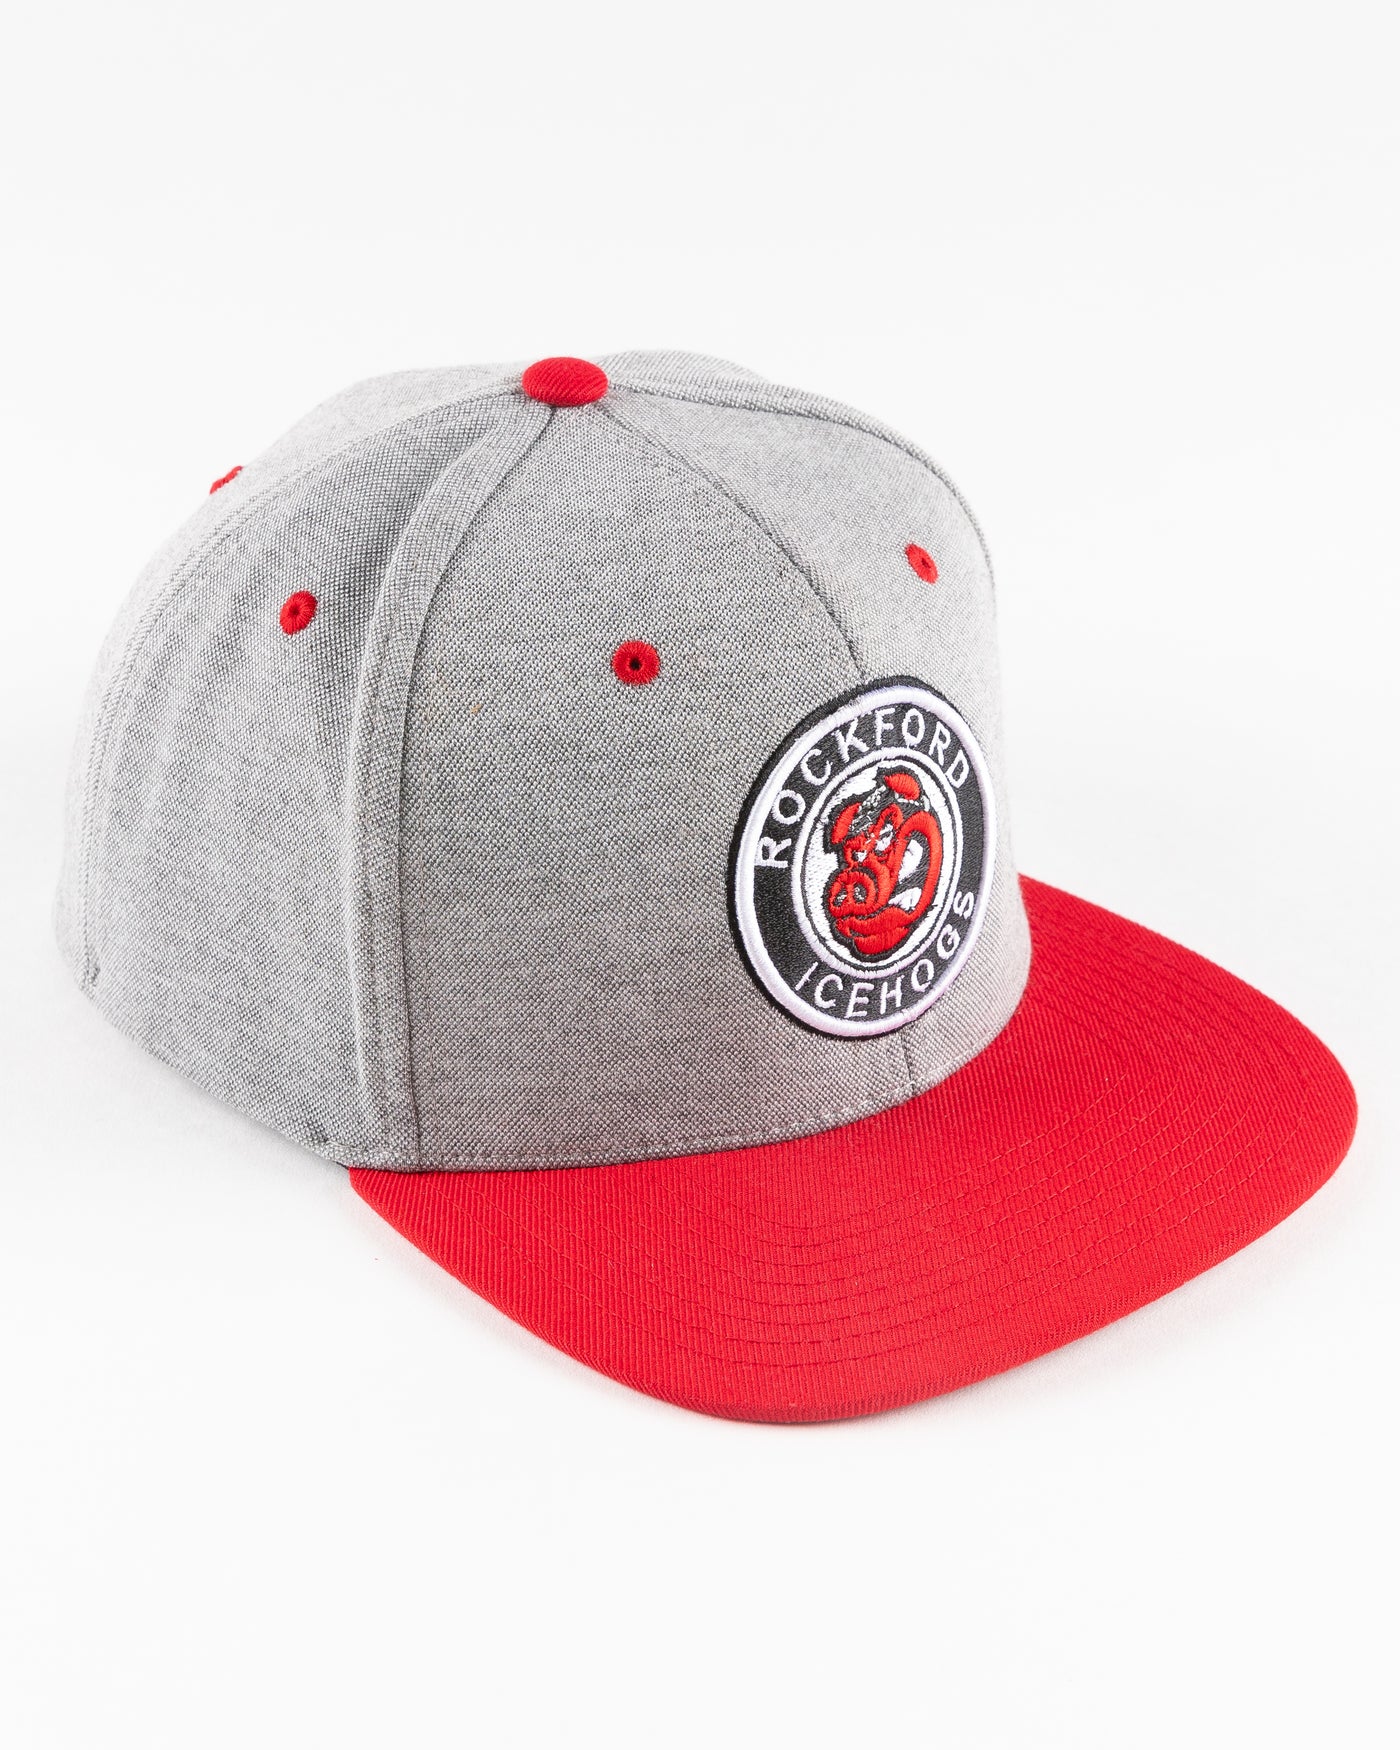 grey Rockford IceHogs snapback with red brim and embroidered IceHogs patch - right angle lay flat